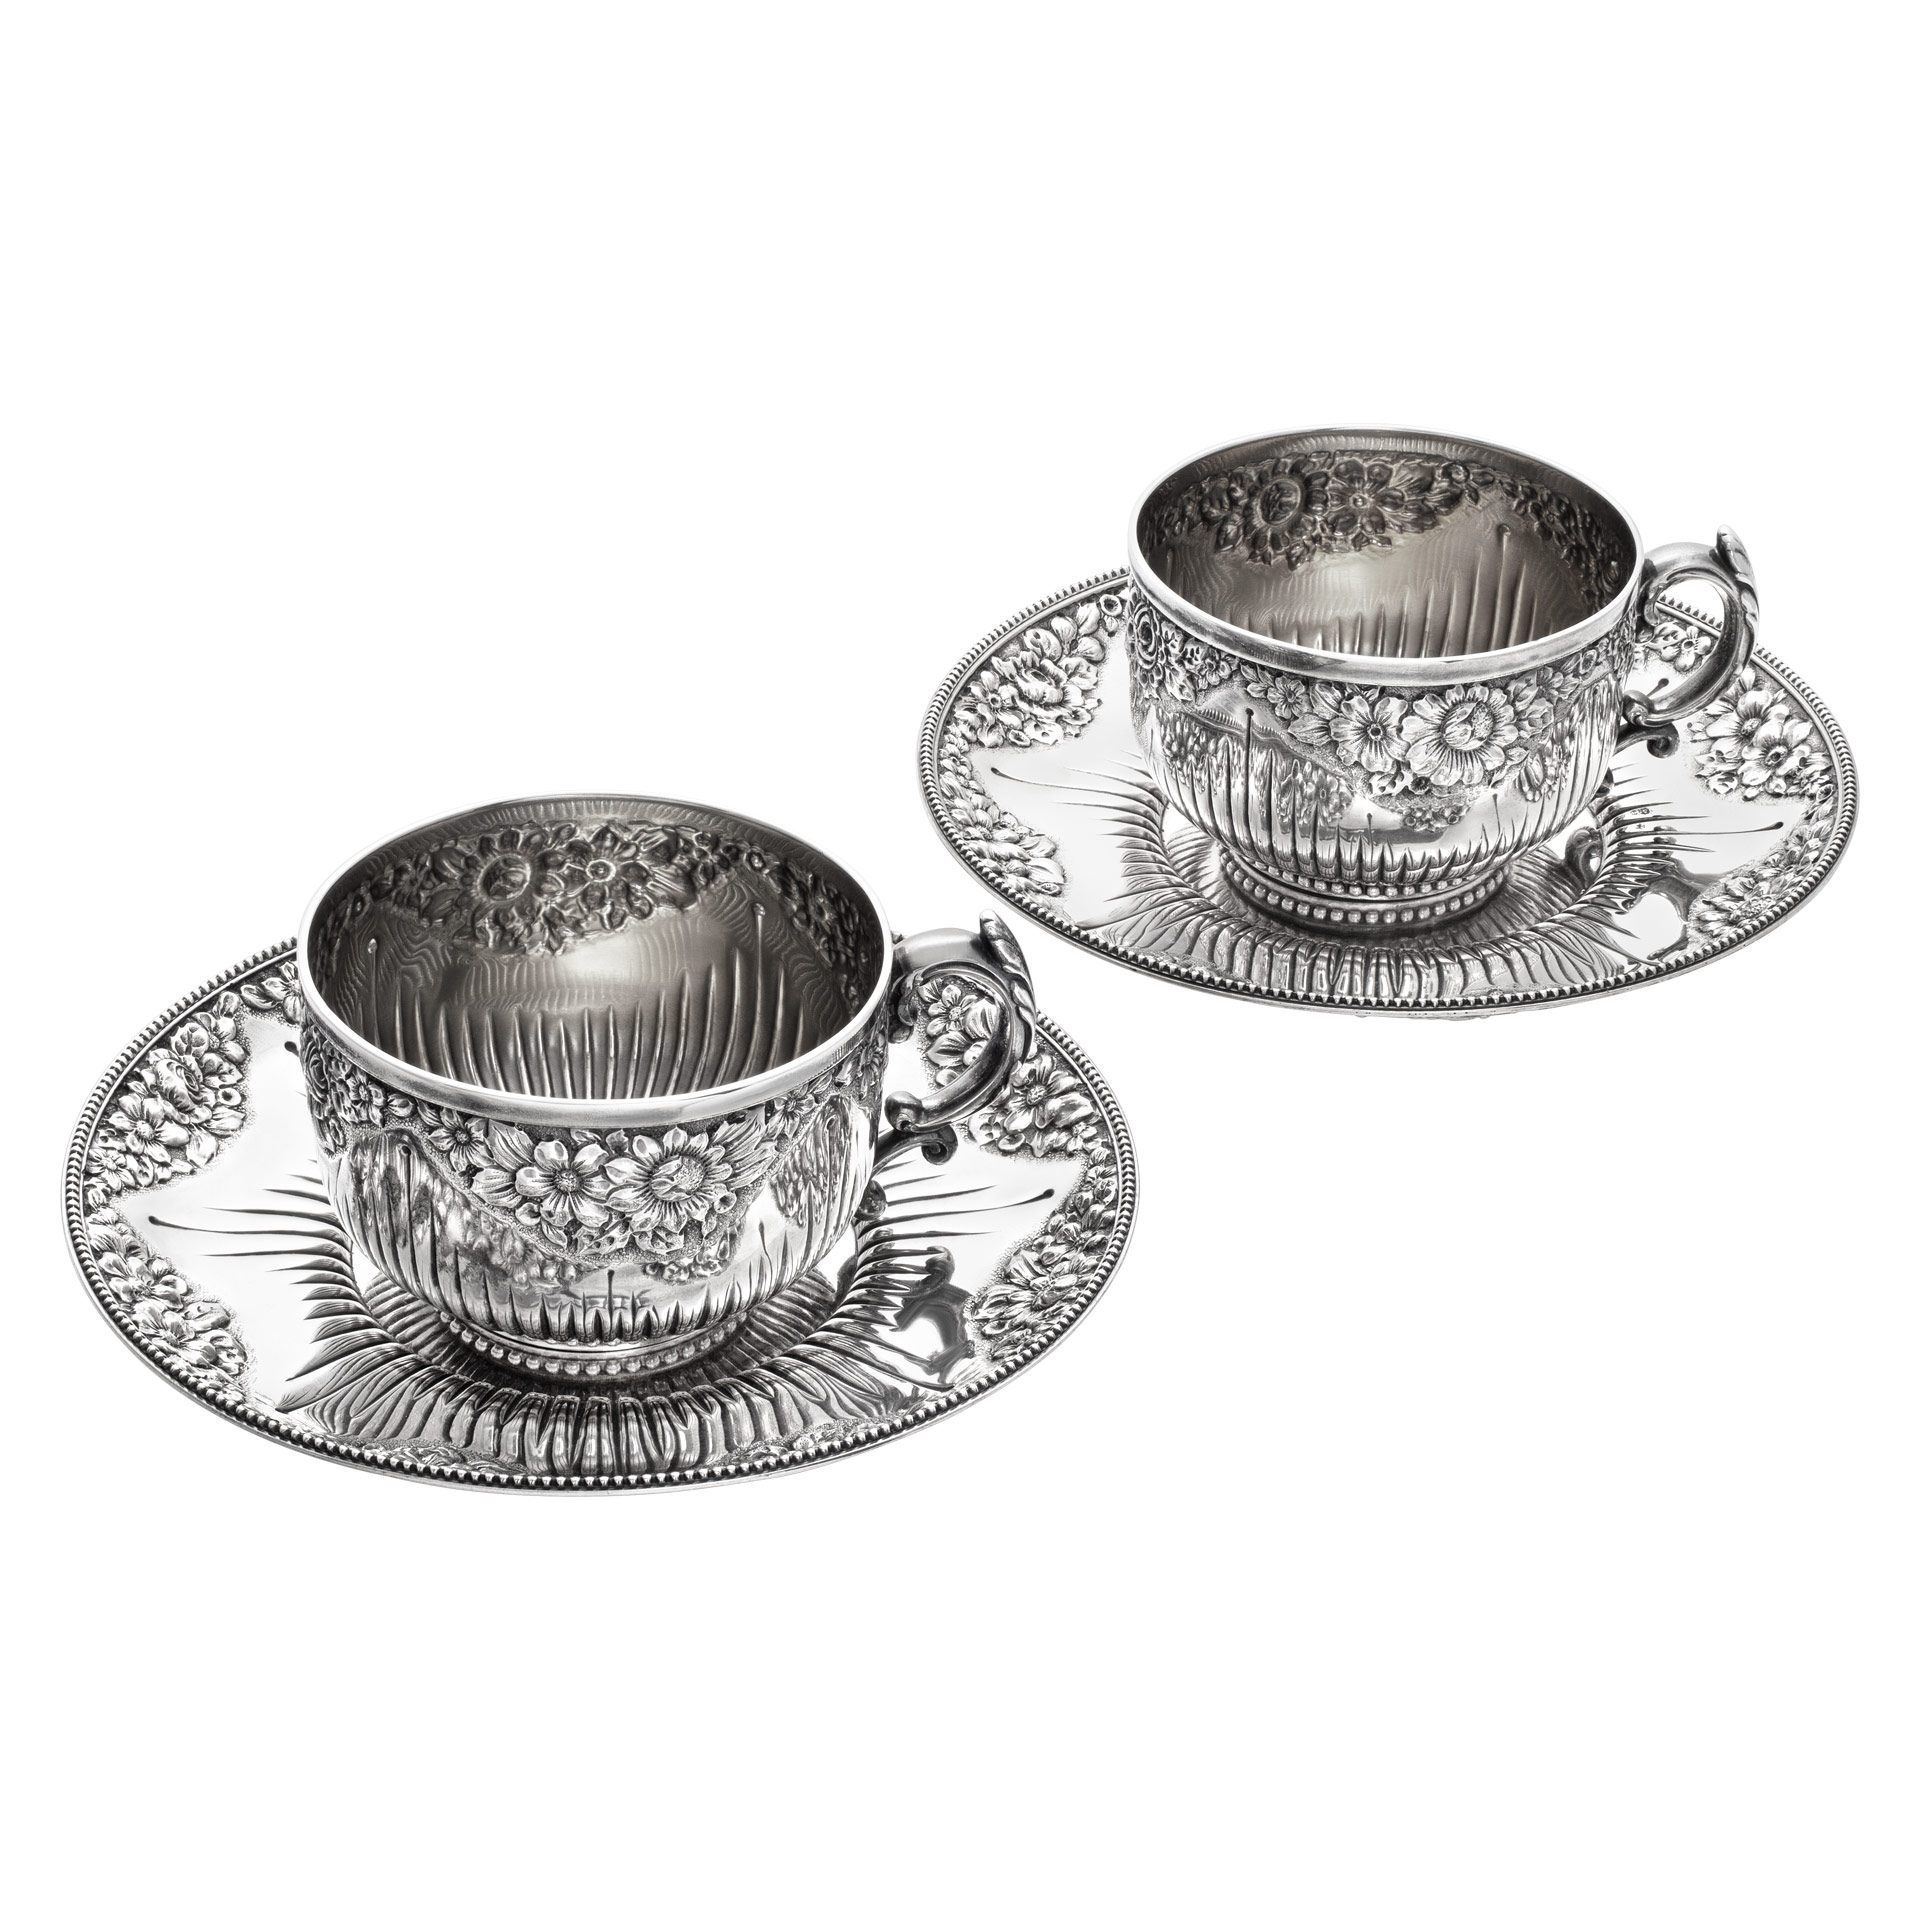  "Cluny" Ptd 1883, Pair Of Sterling Silver Demi-Tasse Coffe Cup With Matching Saucer. image 3